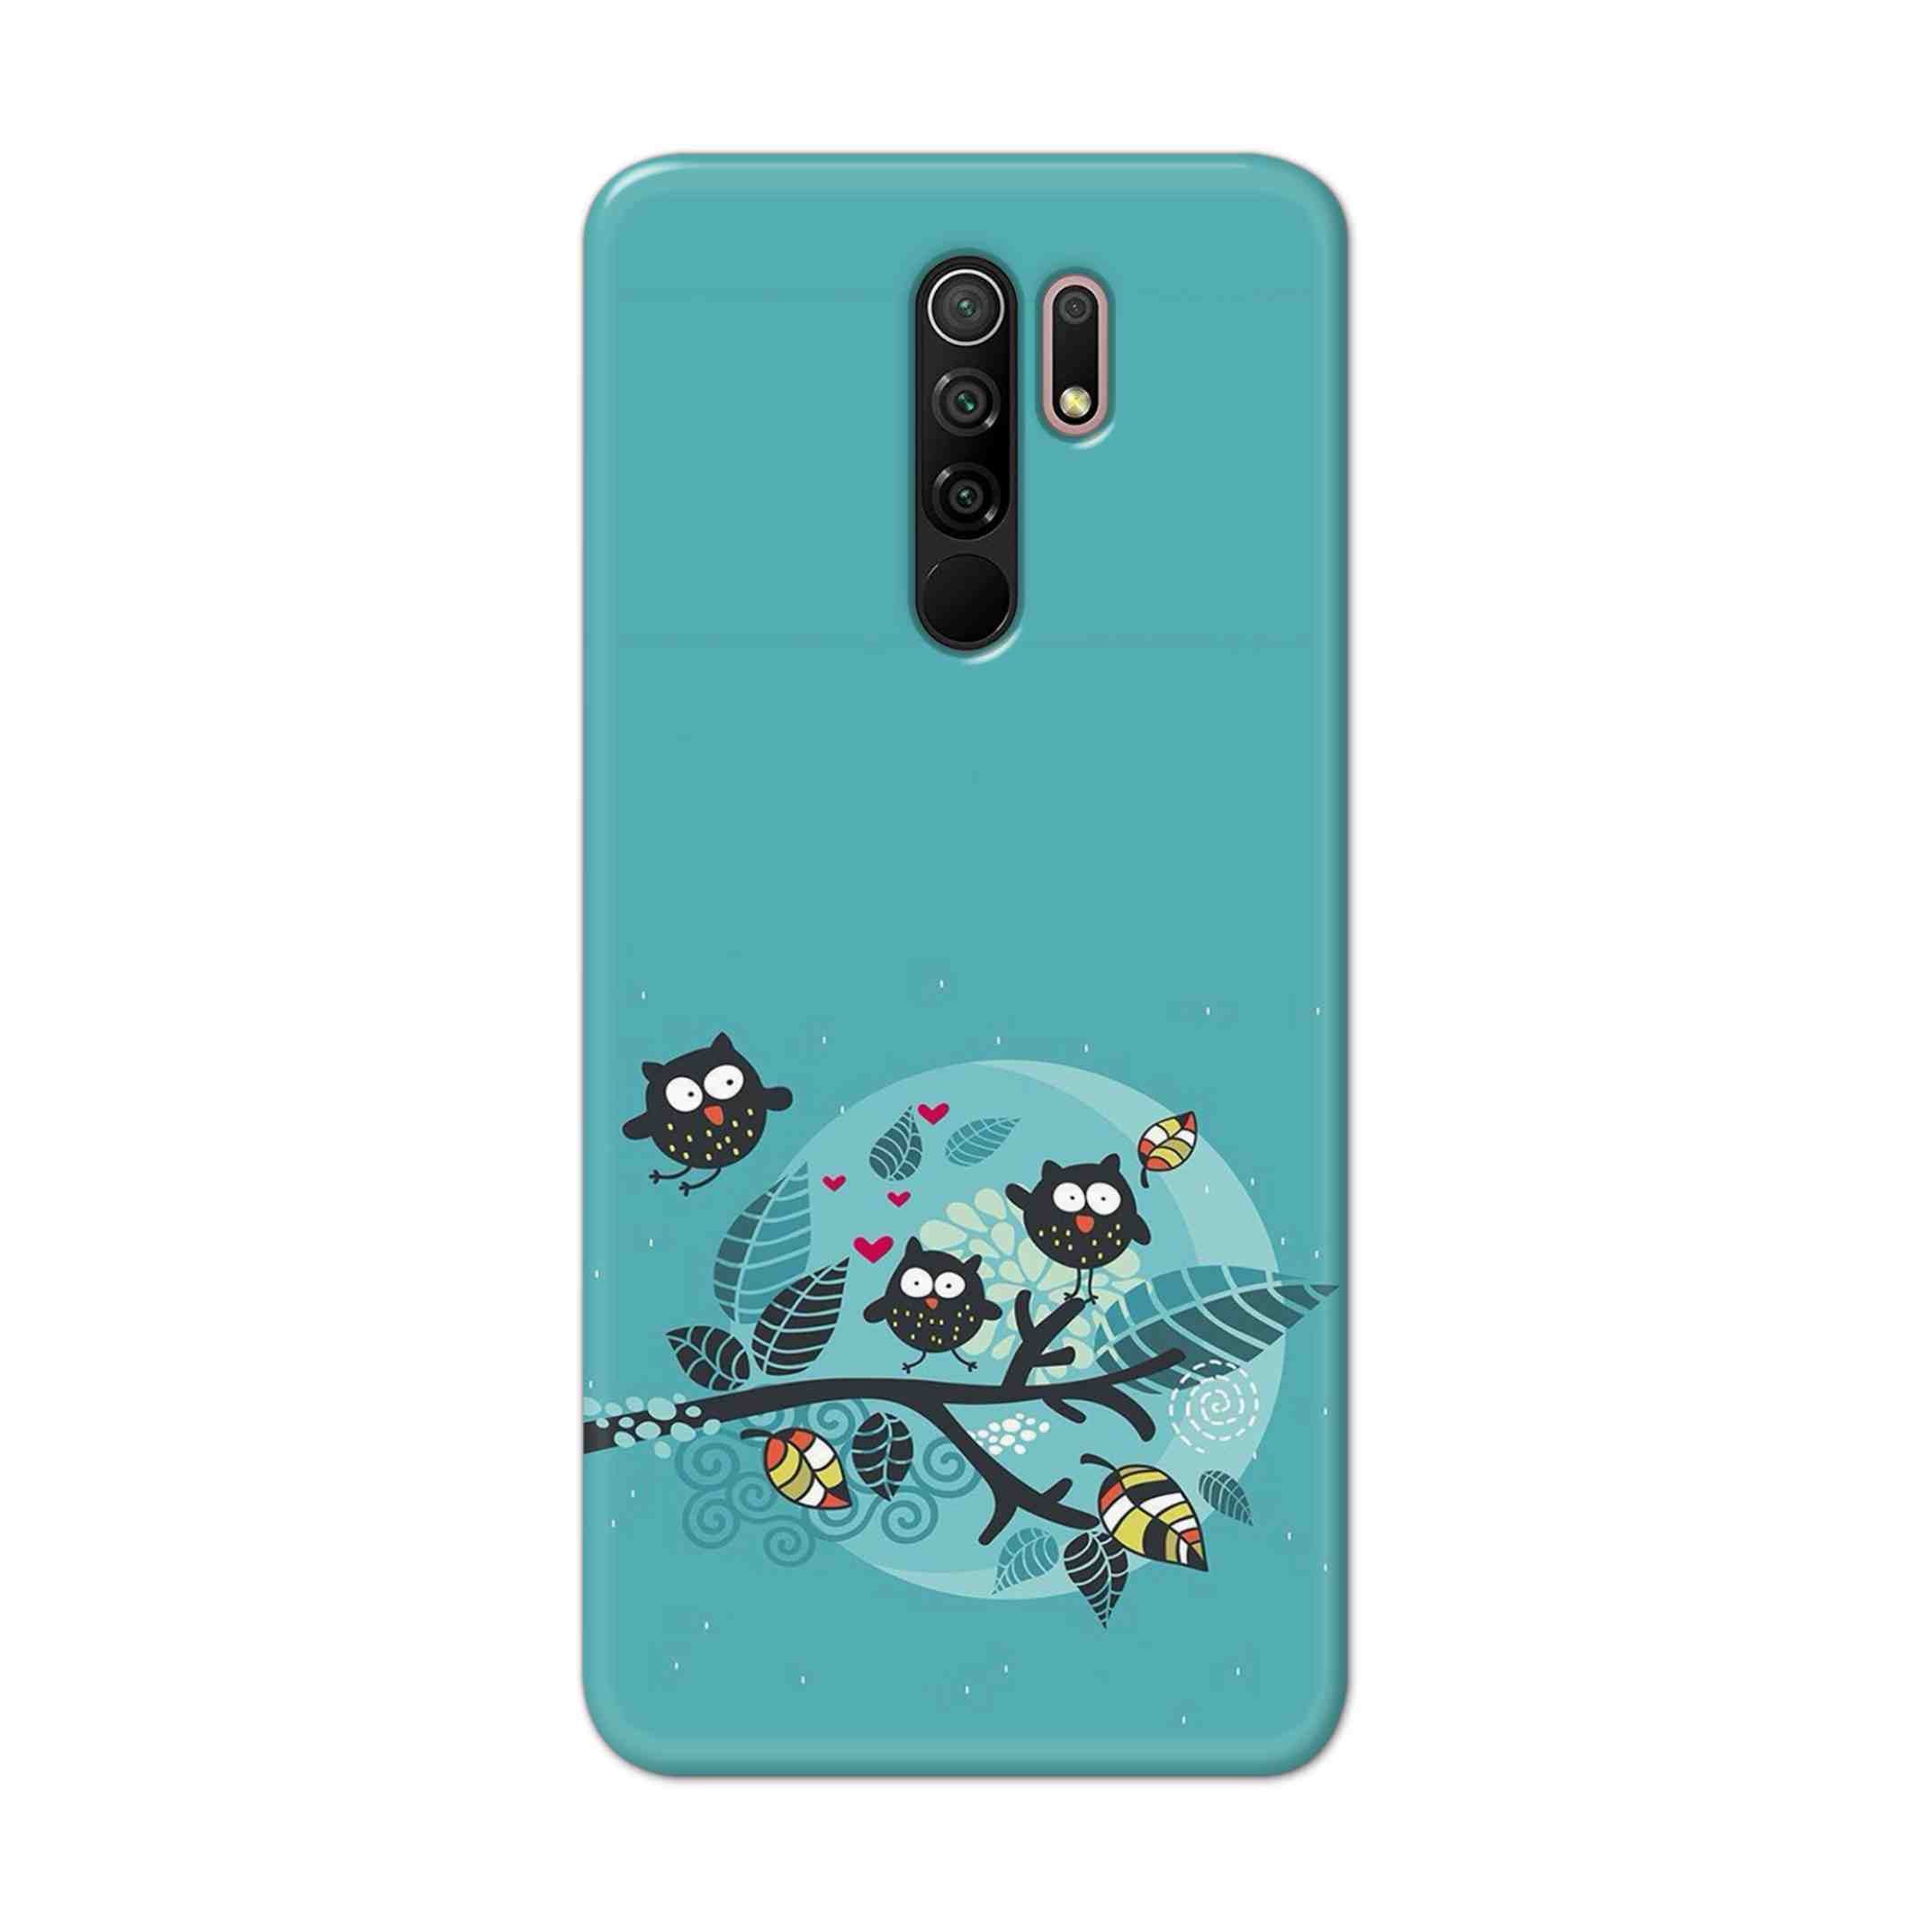 Buy Owl Hard Back Mobile Phone Case Cover For Xiaomi Redmi 9 Prime Online